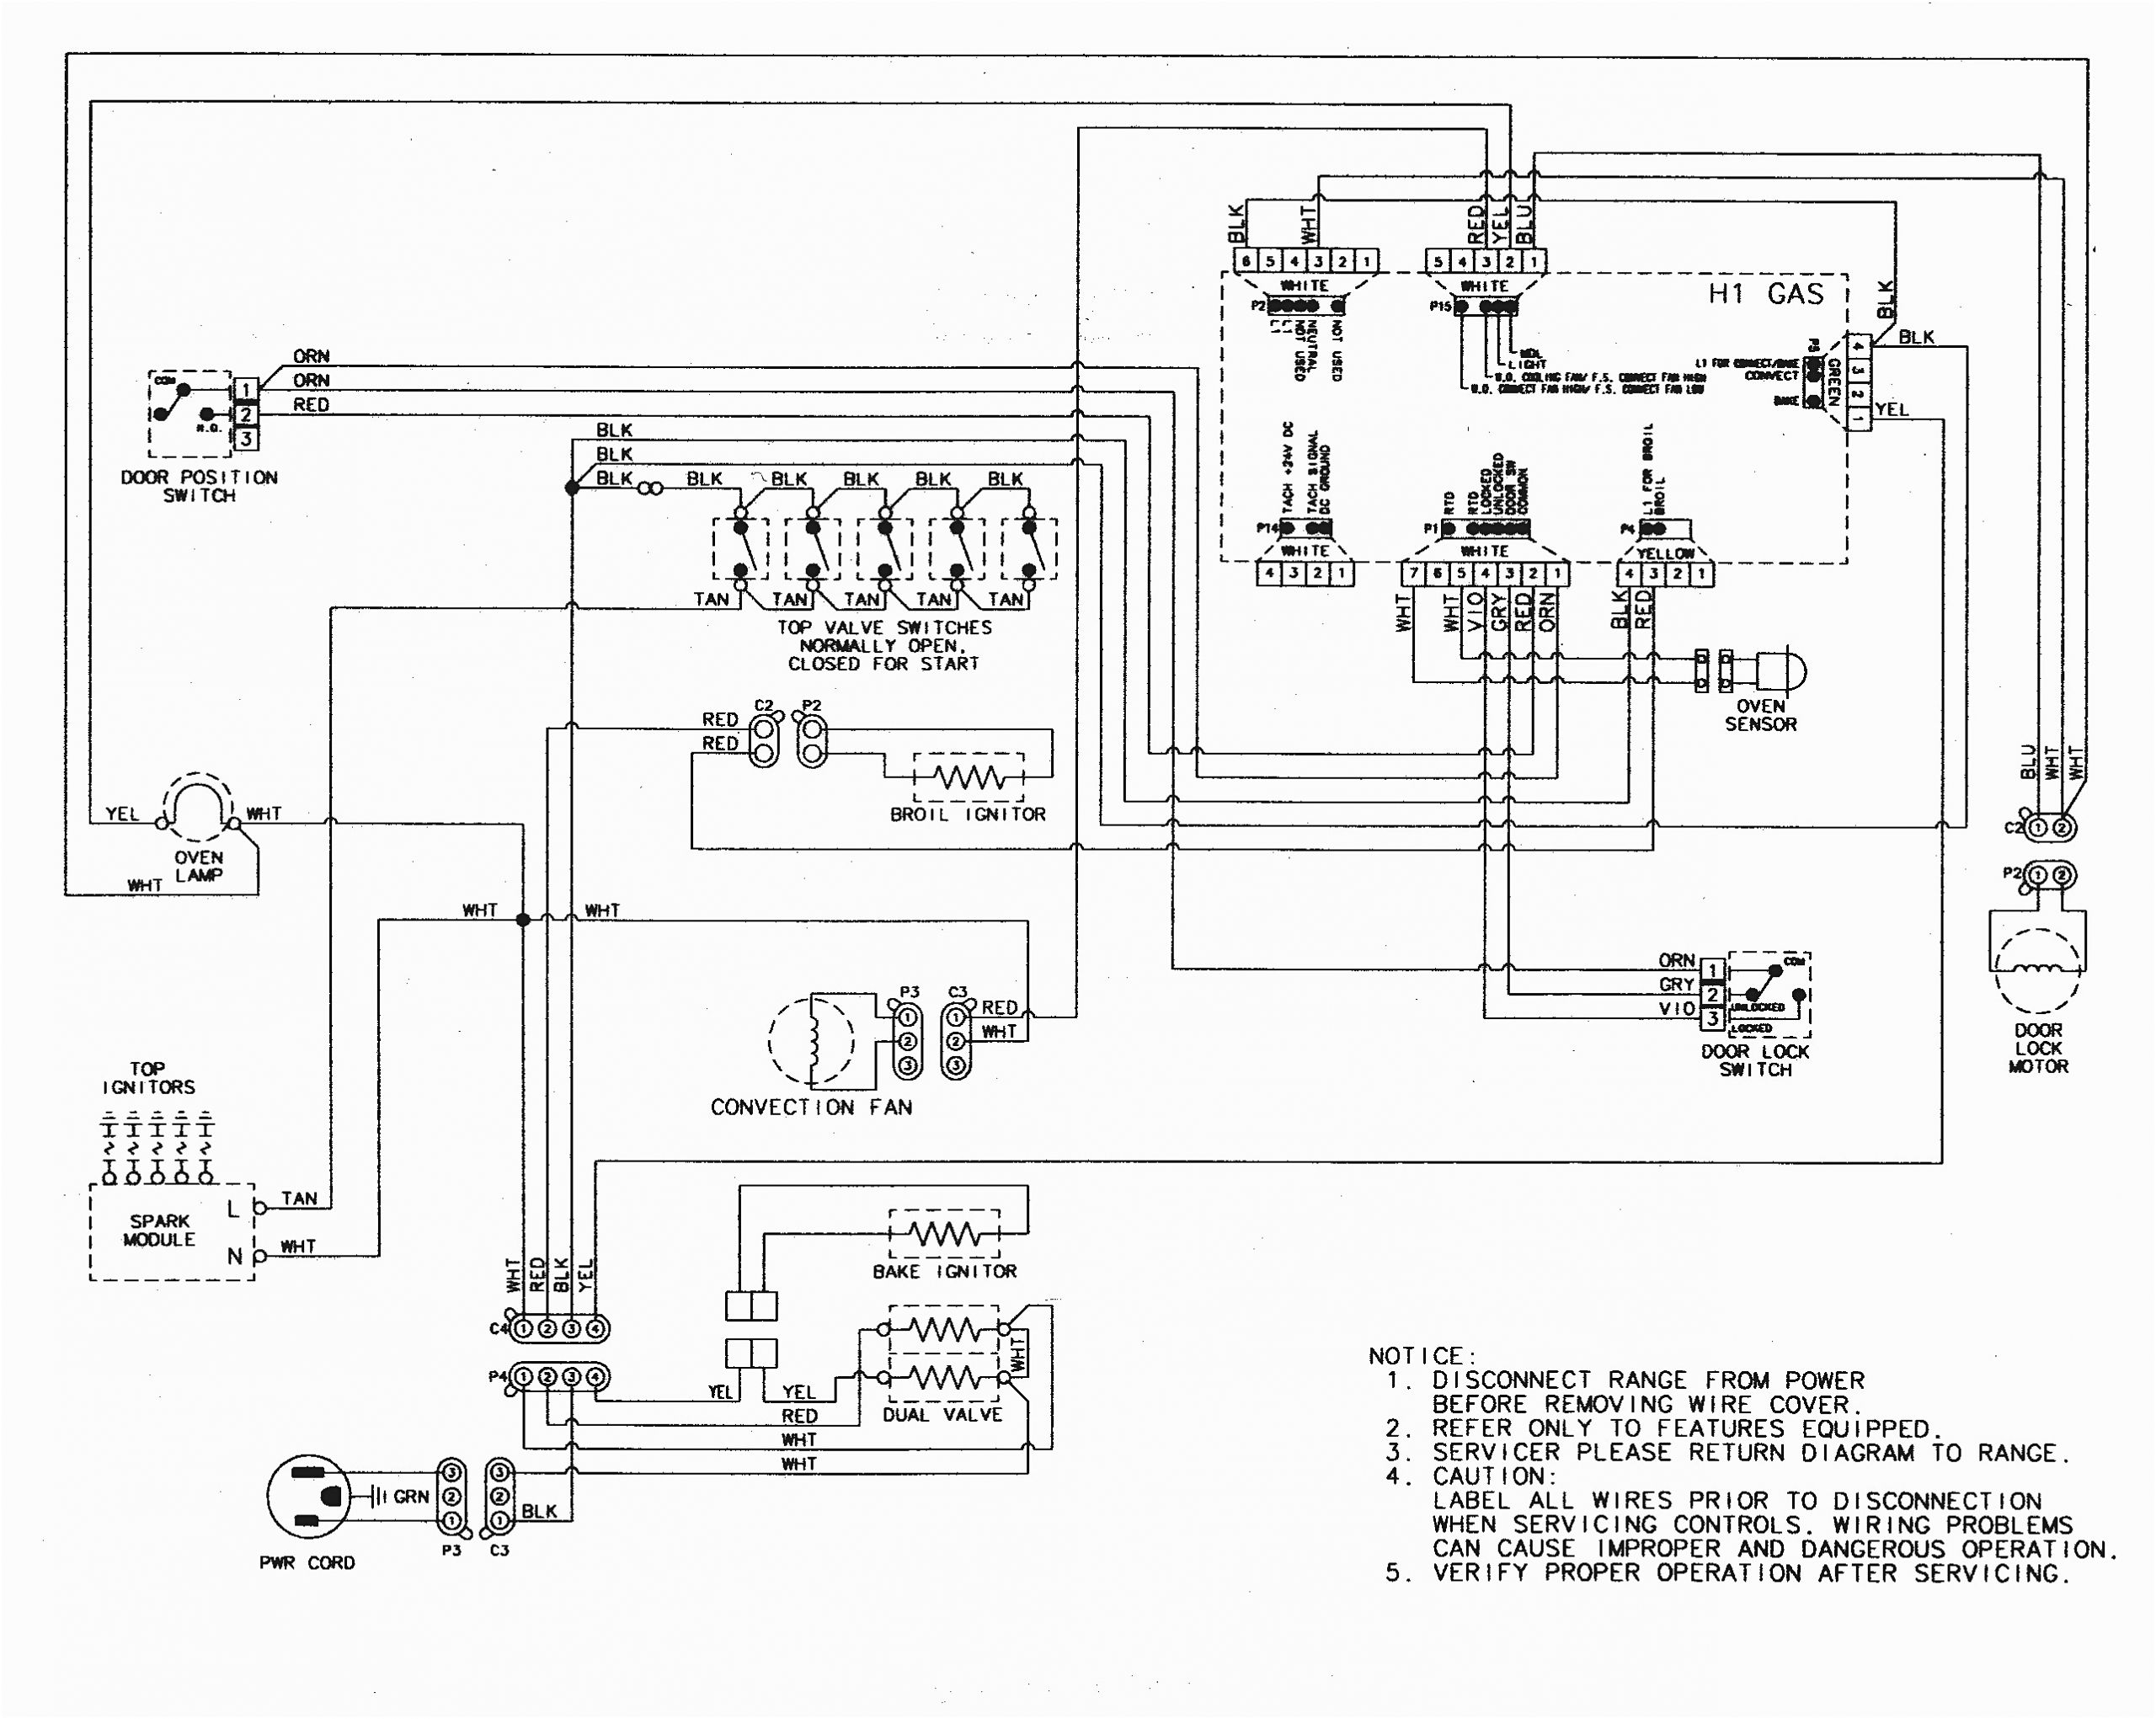 blodgett ef 111 wiring diagram blod t oven schematics wire center u2022 rh statsrsk co blod t oven troubleshooting blod t convection oven parts manual 6h jpg